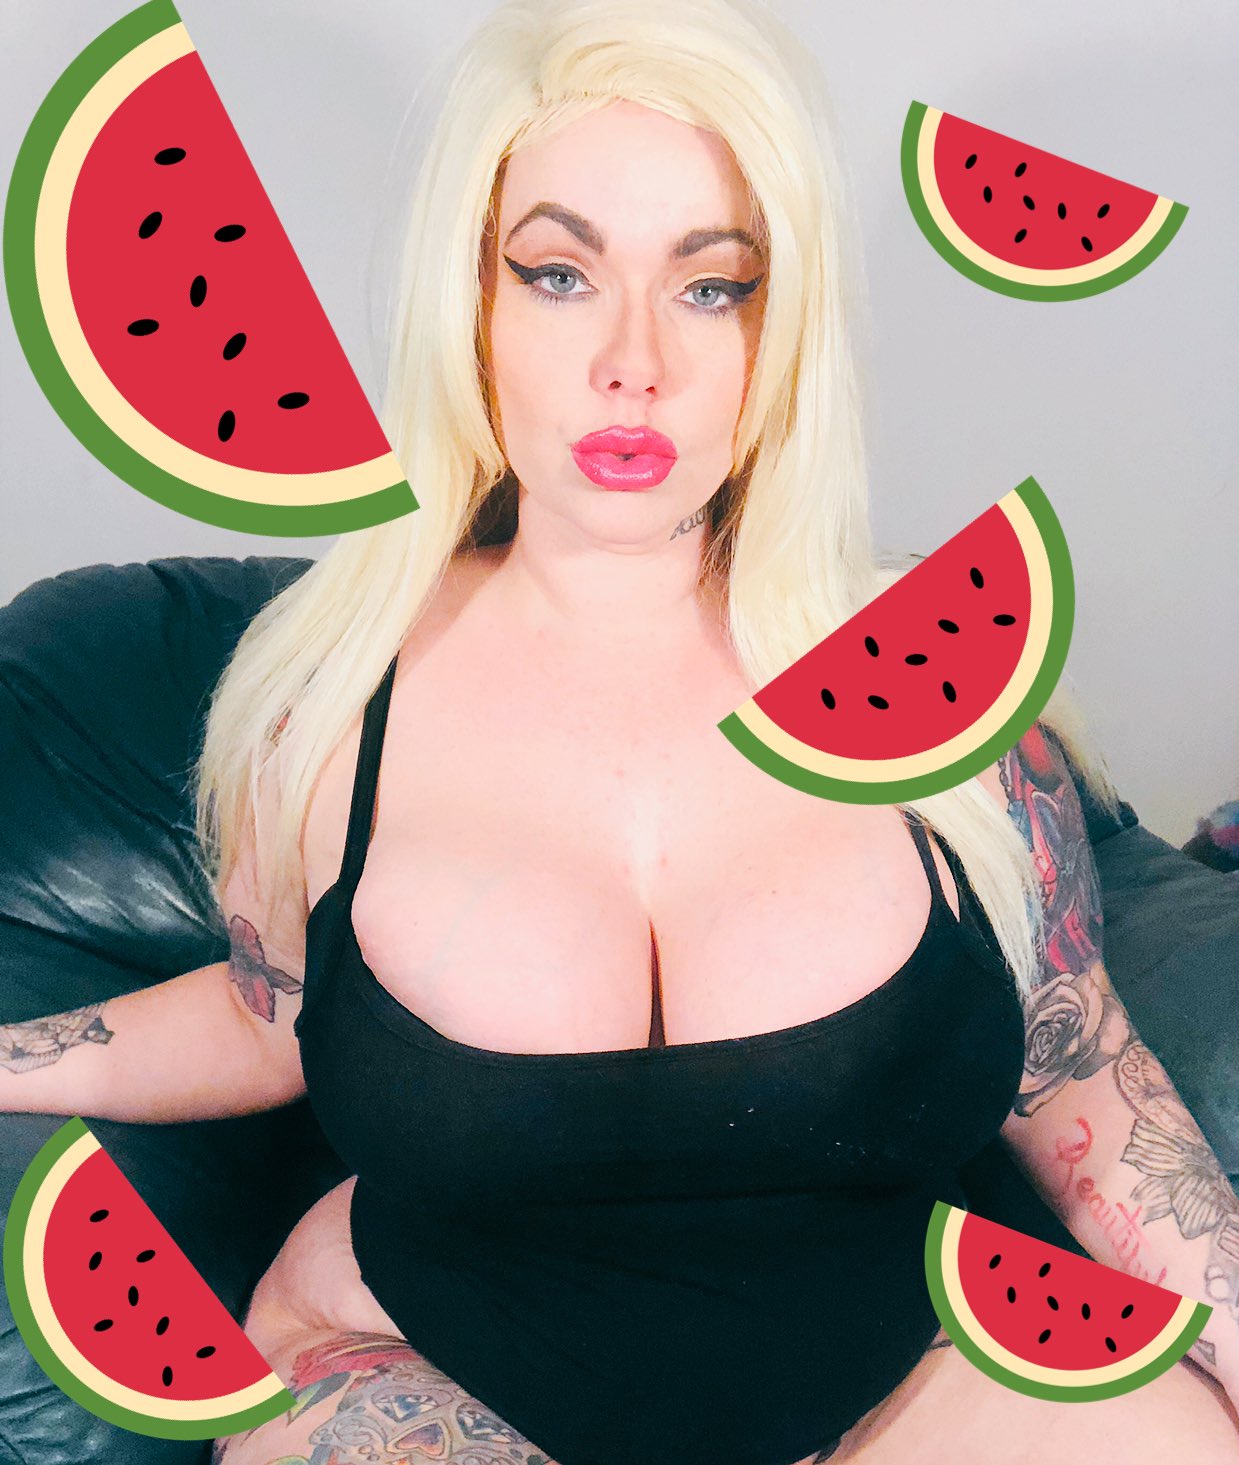 Introducing marilyn melons.